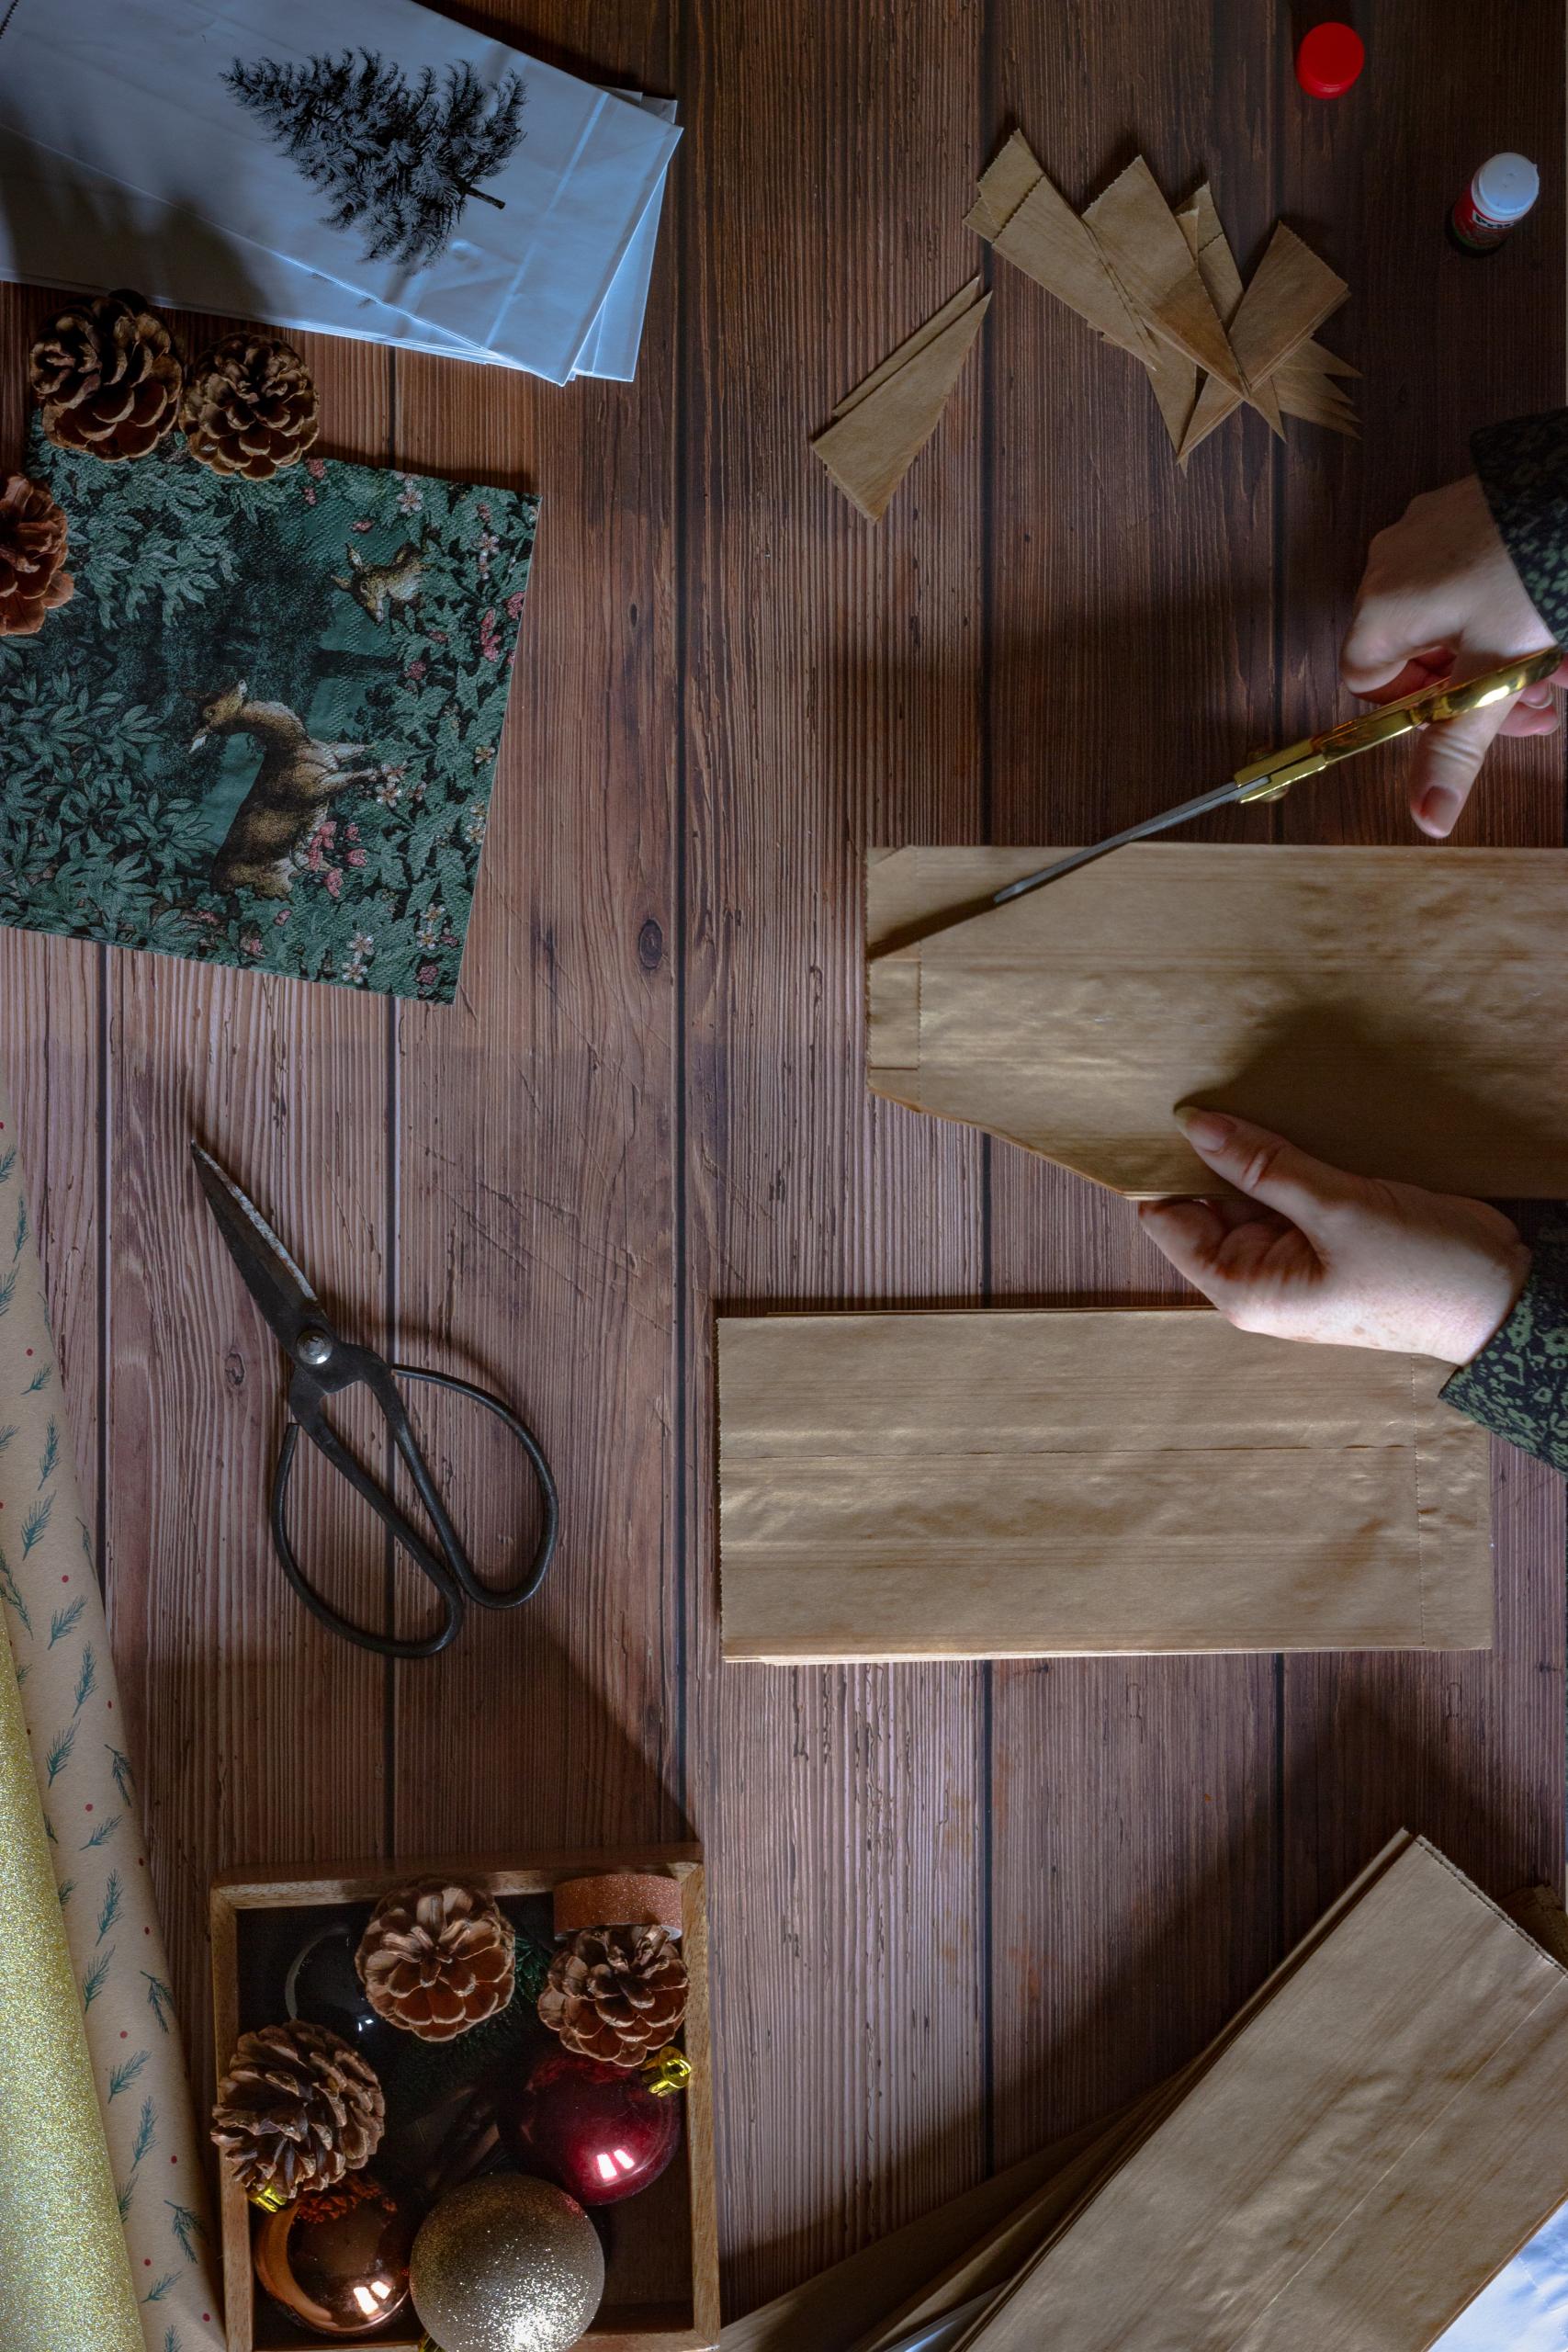 A person cuts parts off brown paper bags. The table has other Christmassy arts and crafts materials on it.